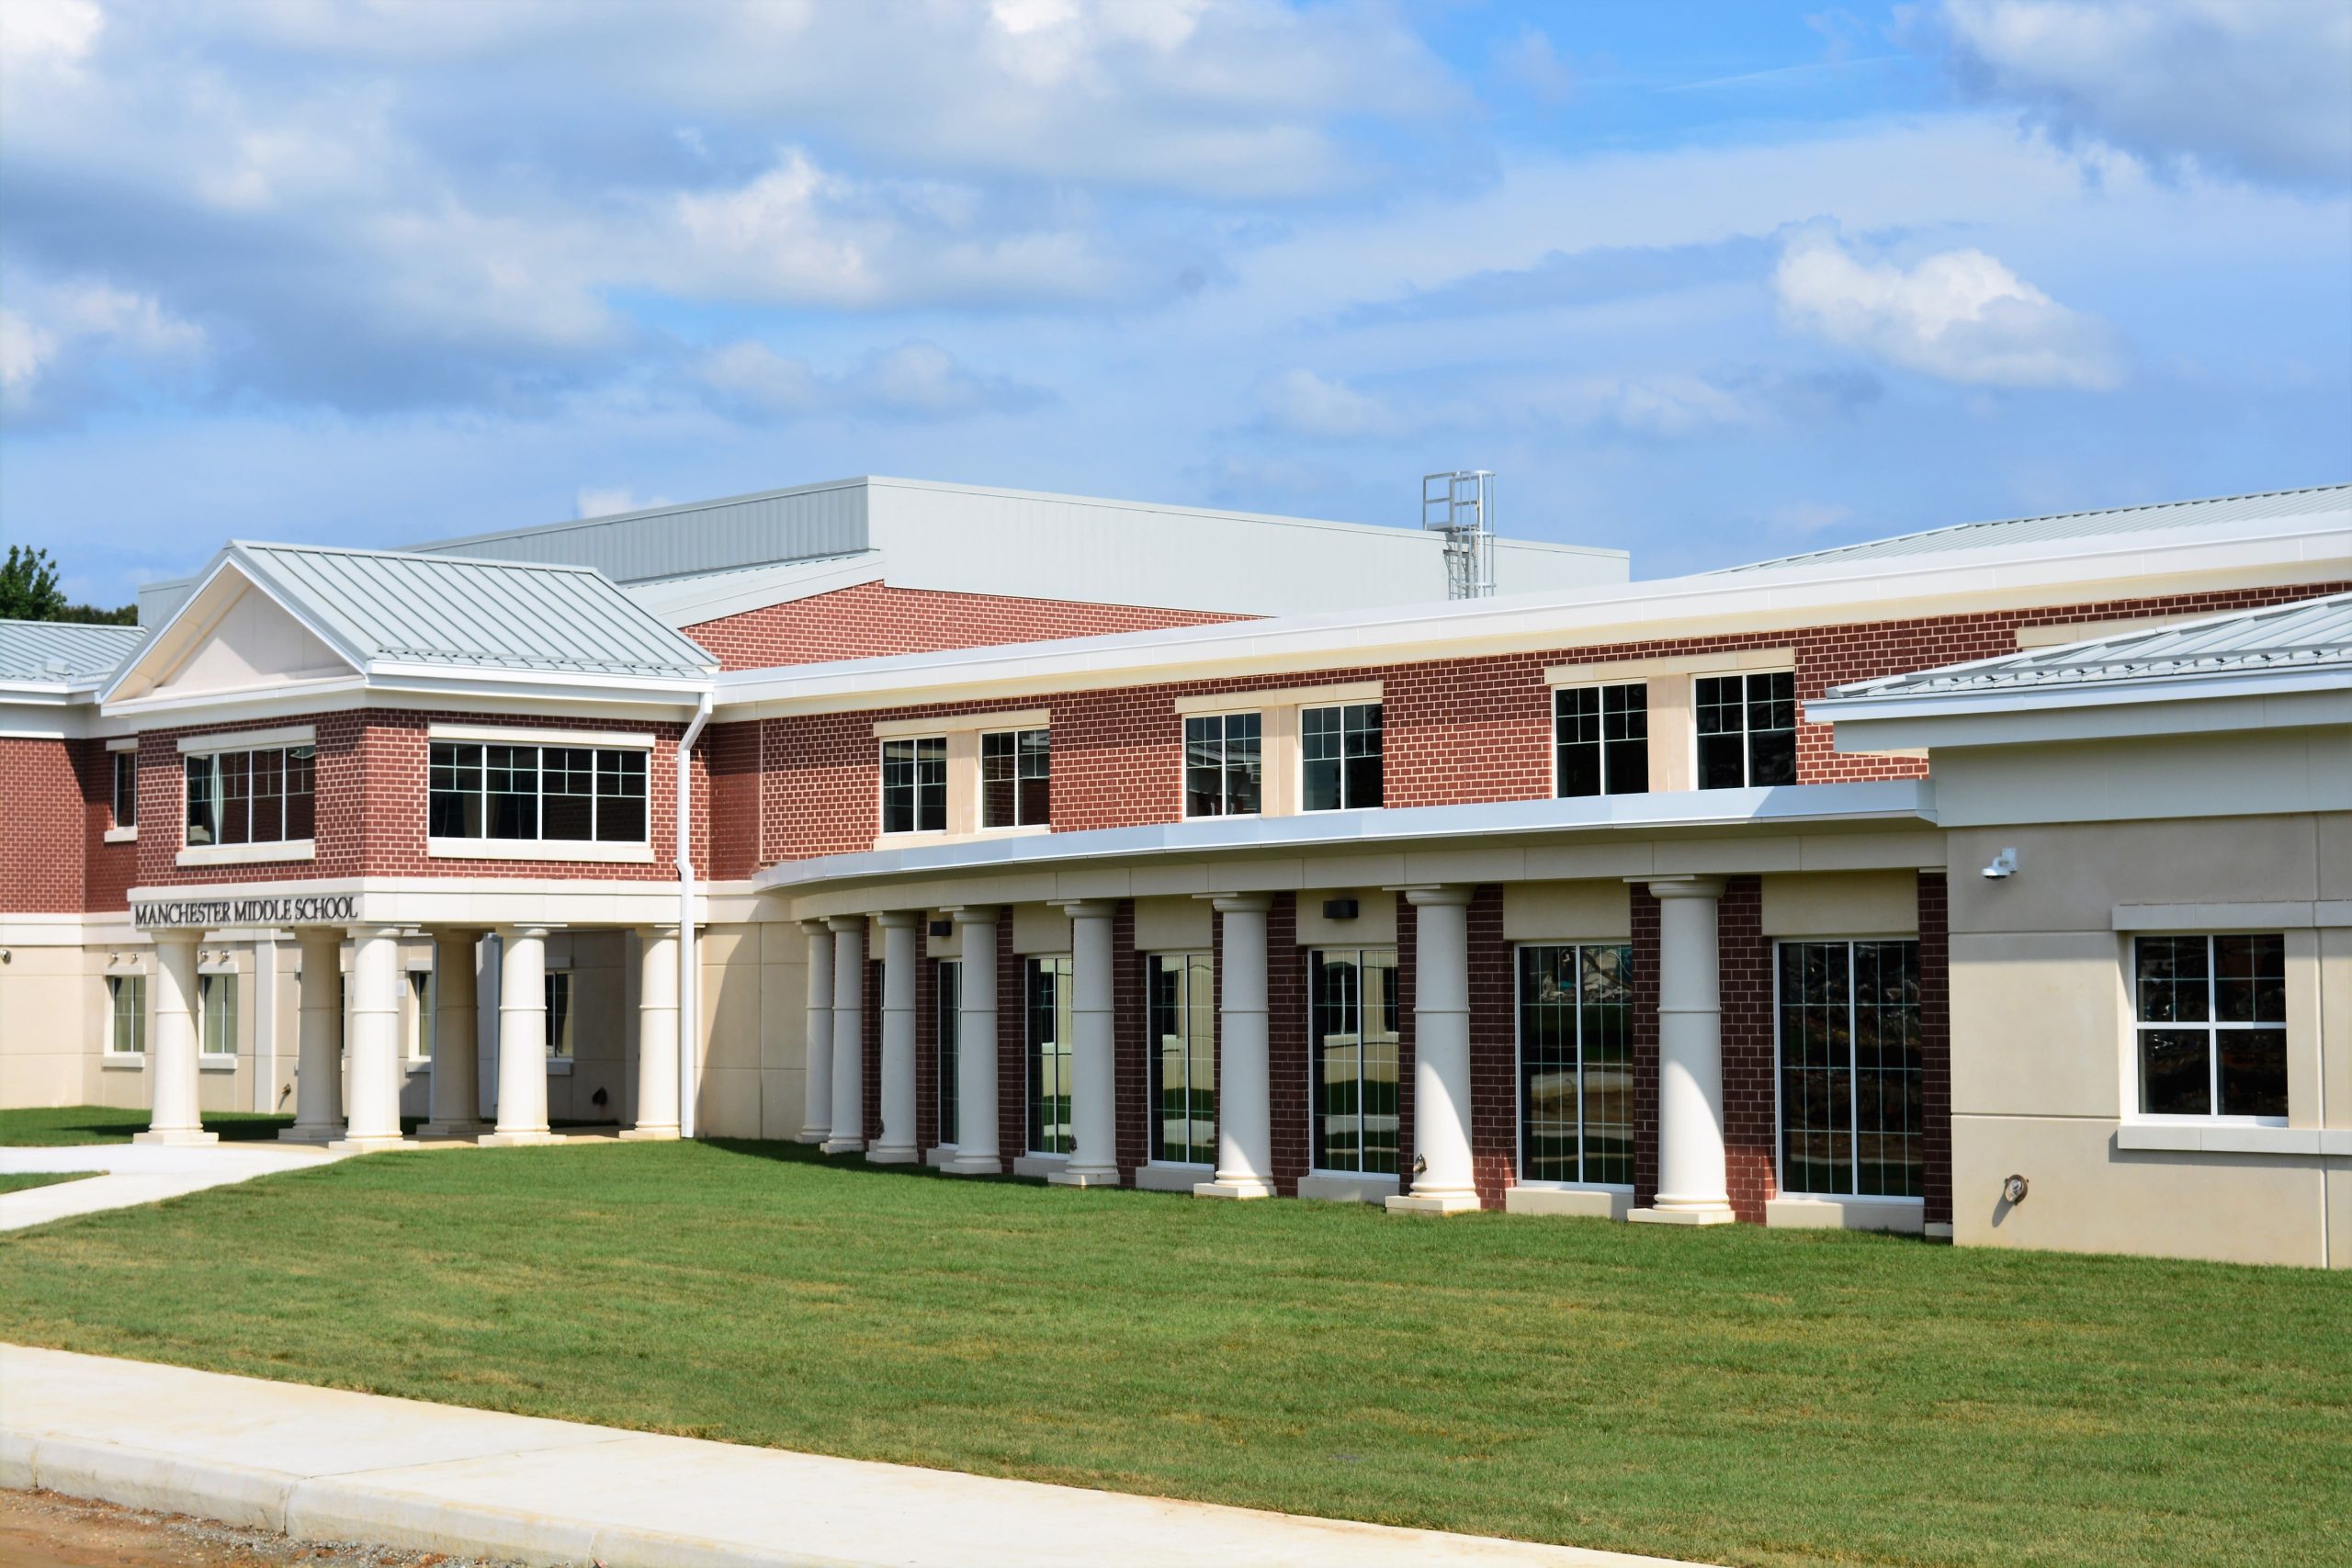 An exterior view of a public school constructed using precast concrete wall panels.